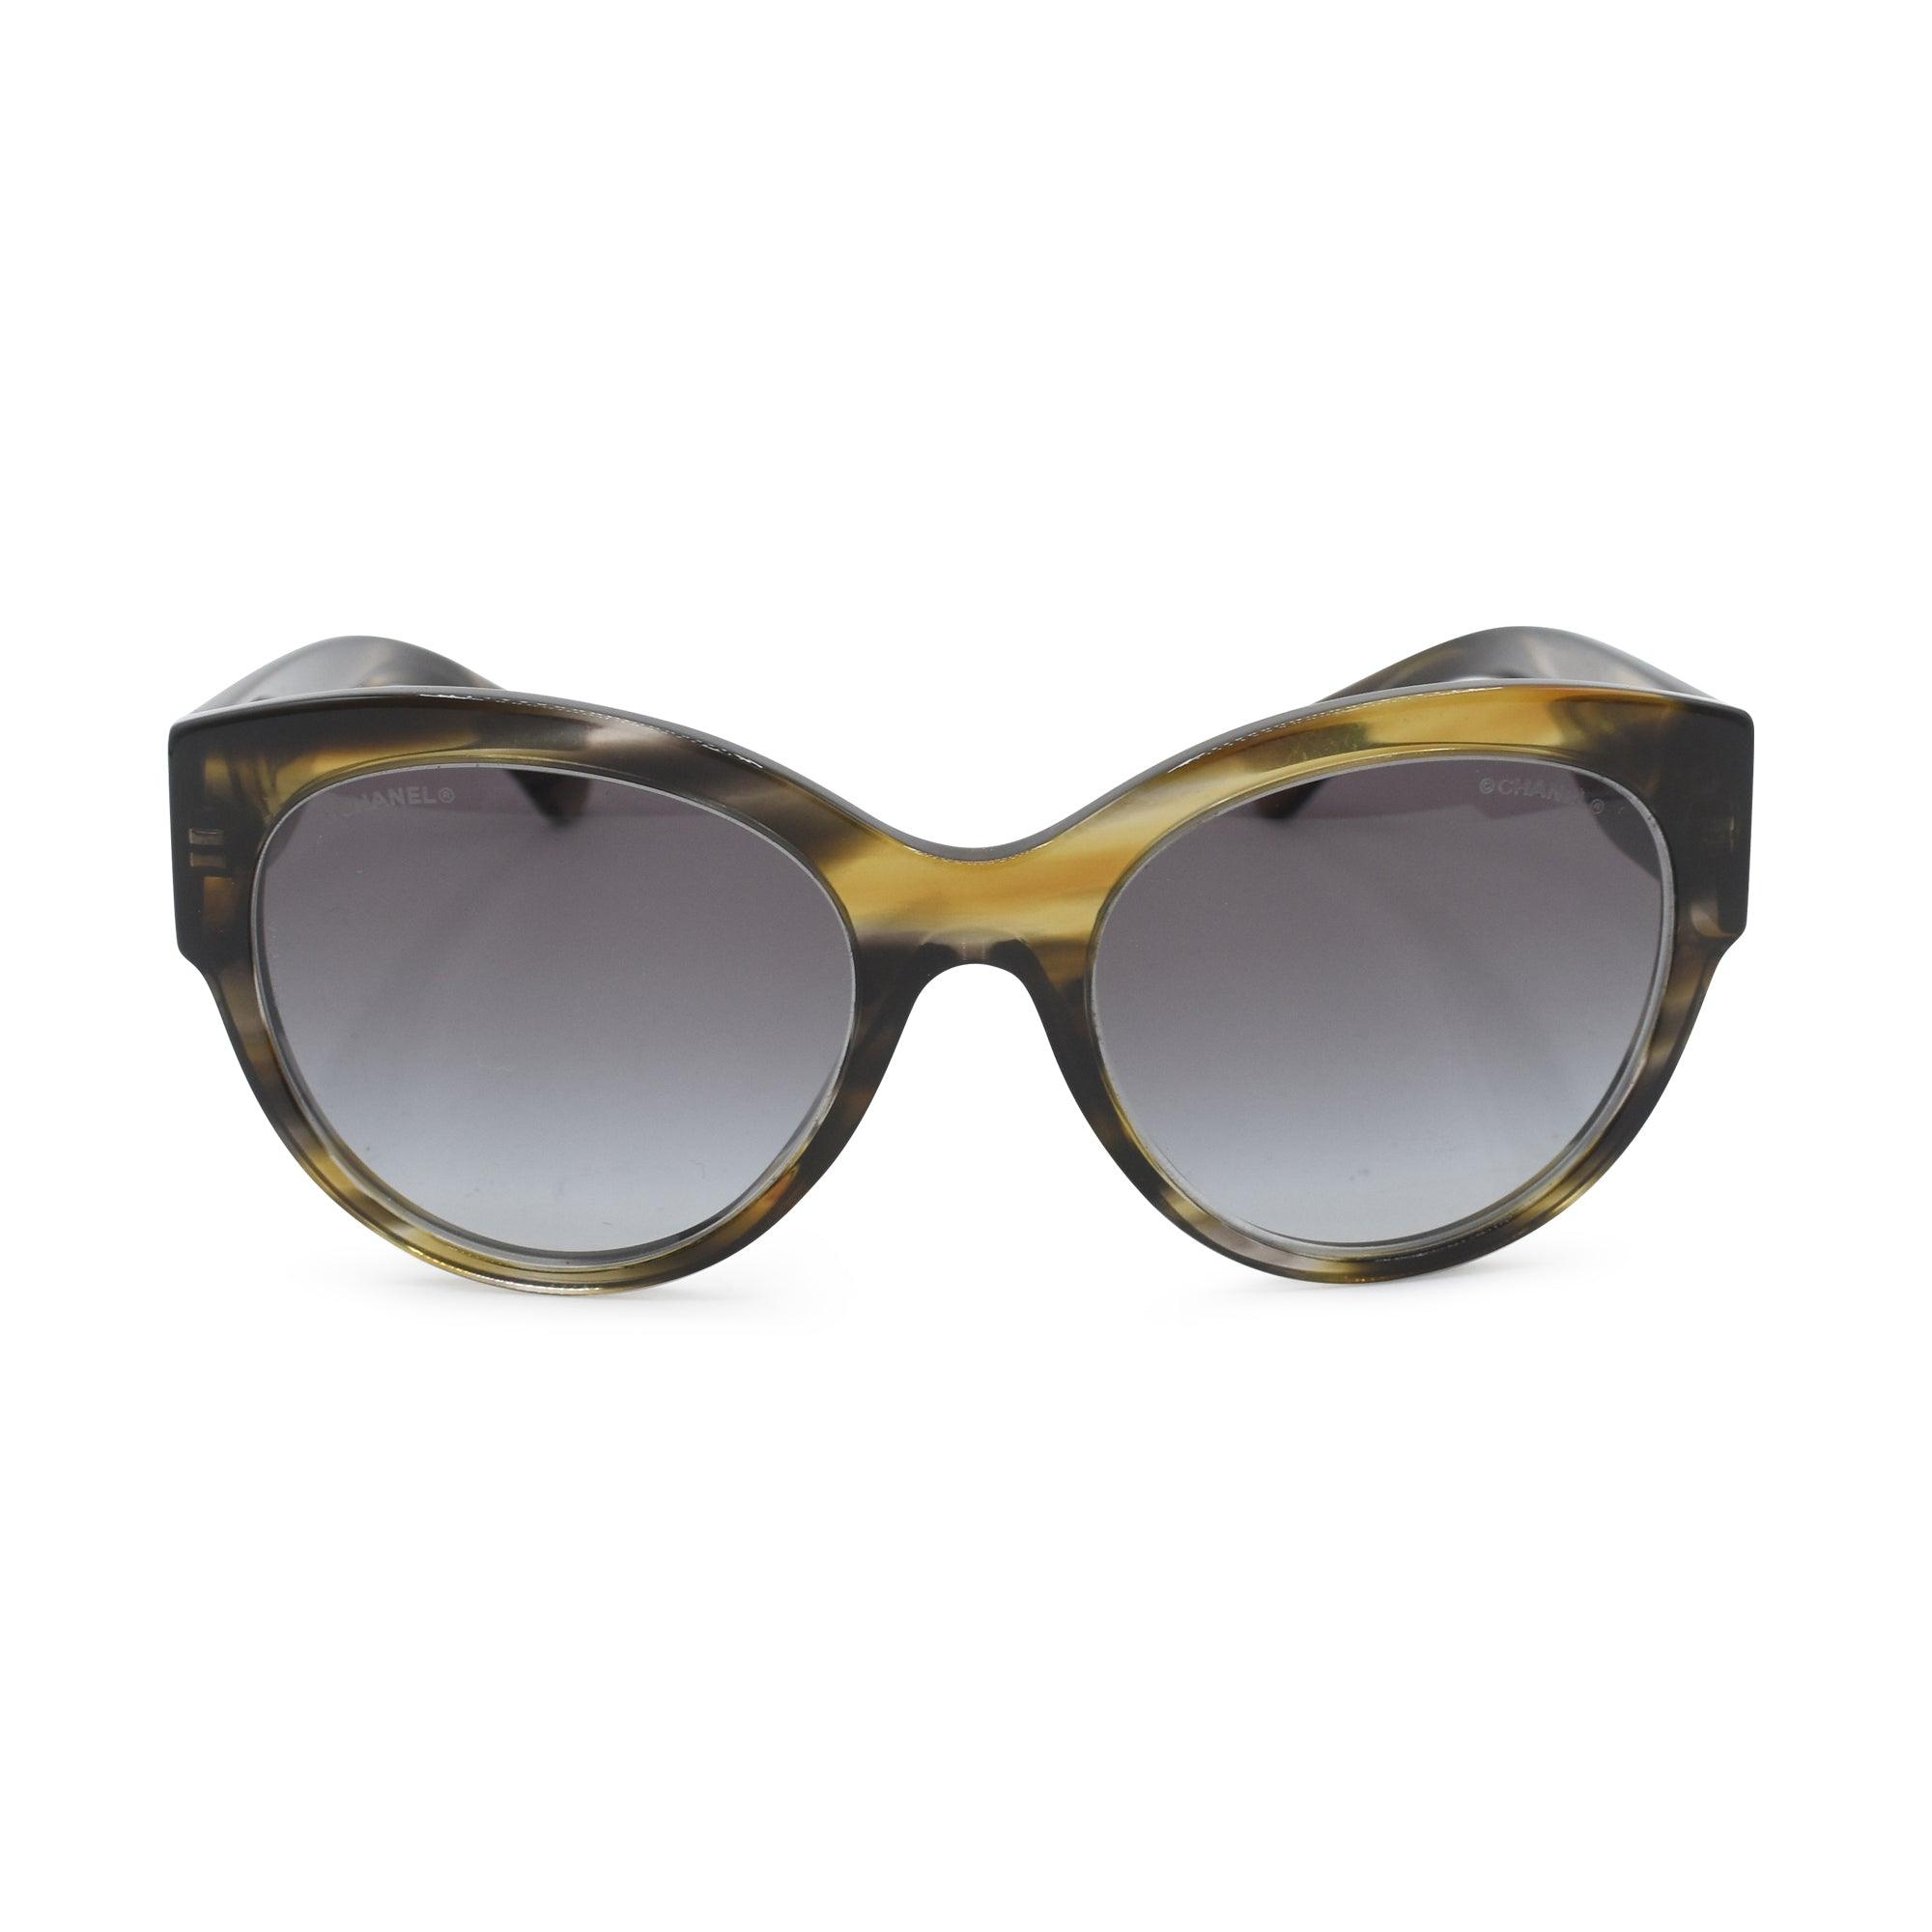 Chanel Cat Eye Sunglasses - Fashionably Yours